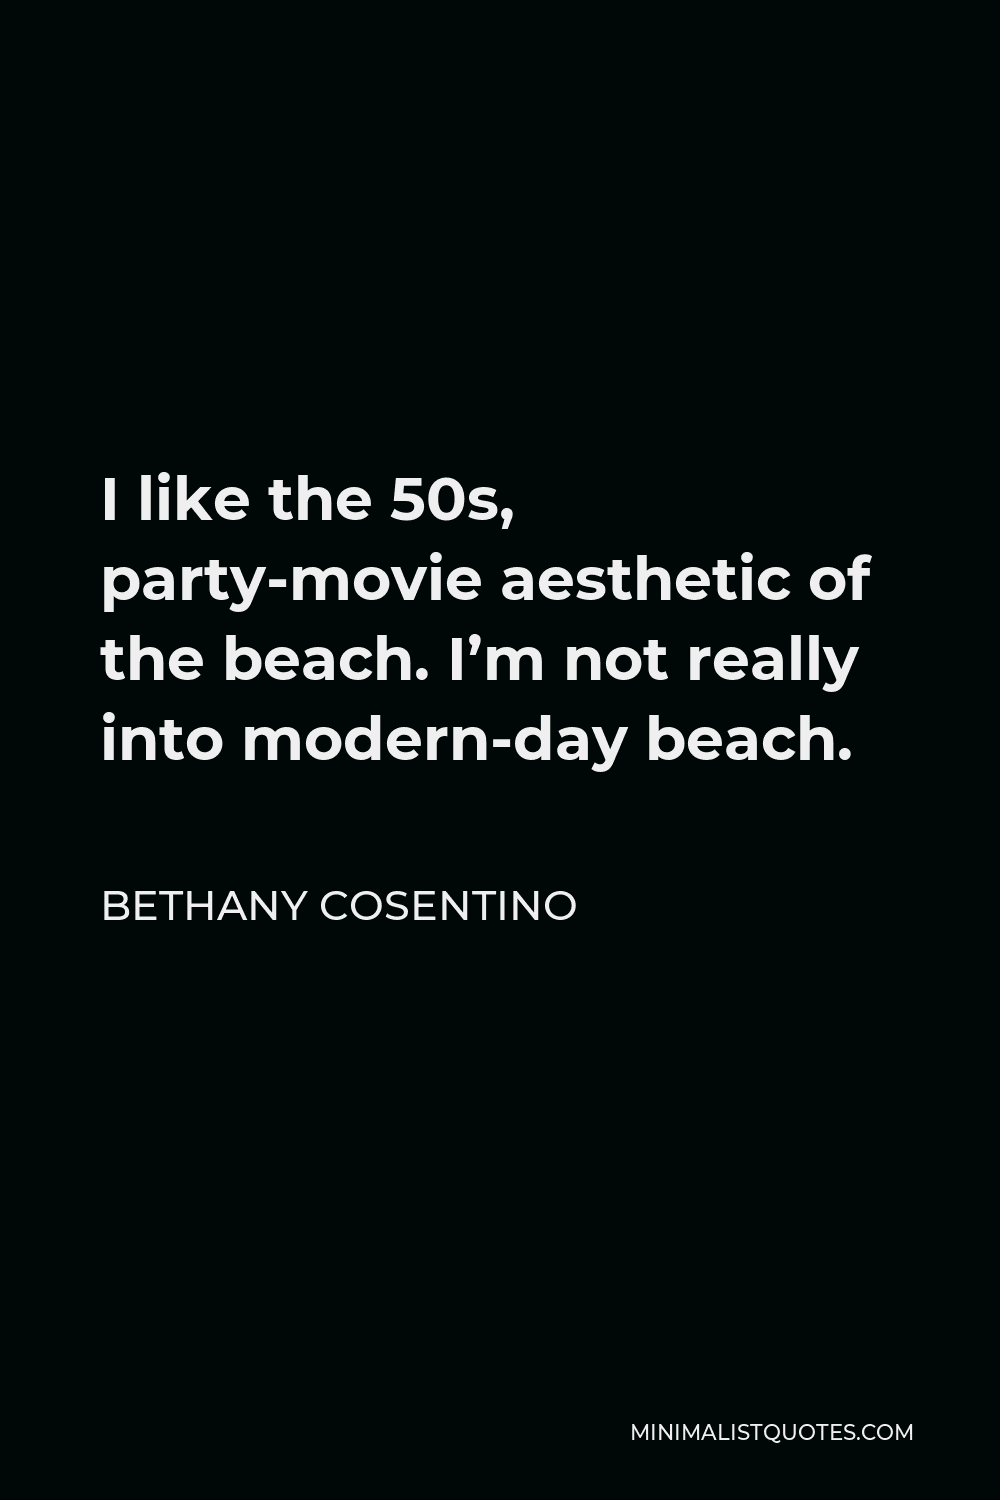 Bethany Cosentino Quote - I like the 50s, party-movie aesthetic of the beach. I’m not really into modern-day beach.